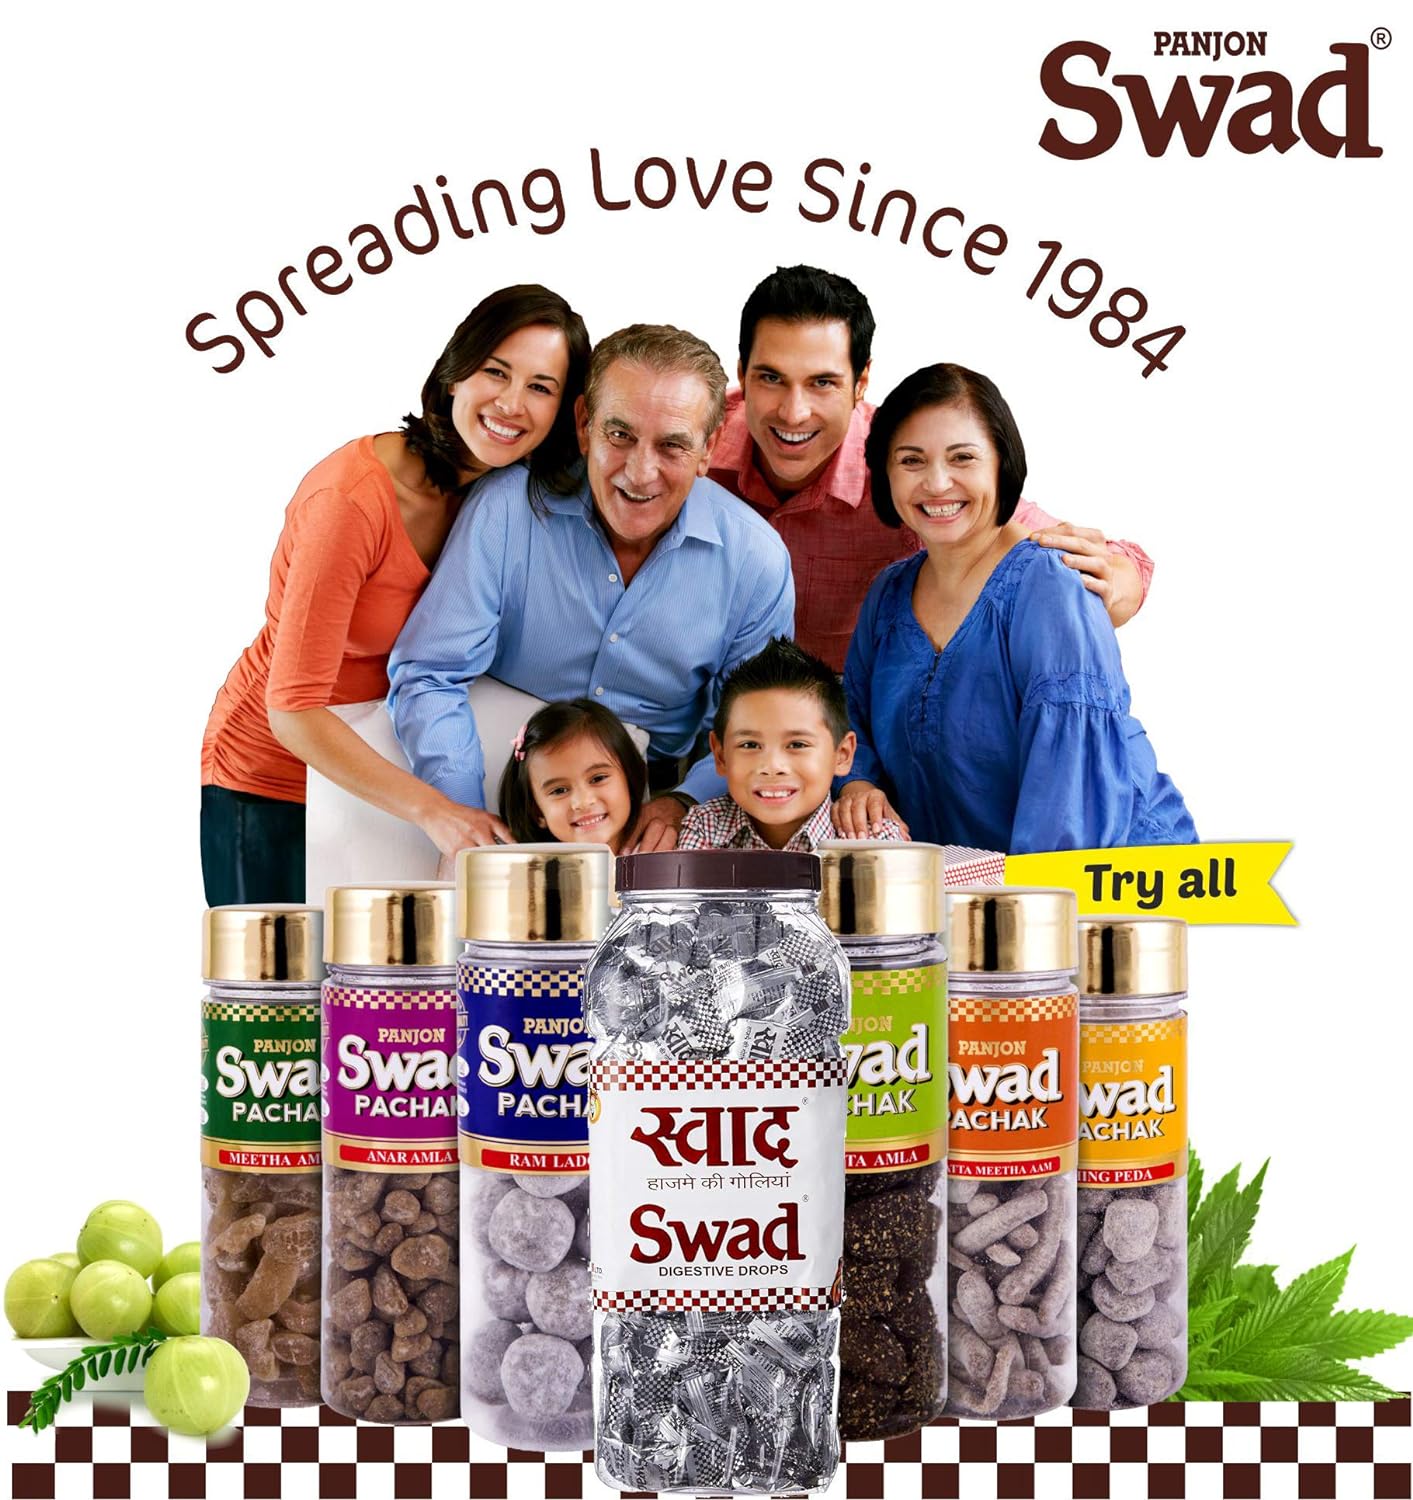 Swad Candy Gift Box (Regular Digestive & Mixed Flavours) 125 Toffee x 2 Box Pack